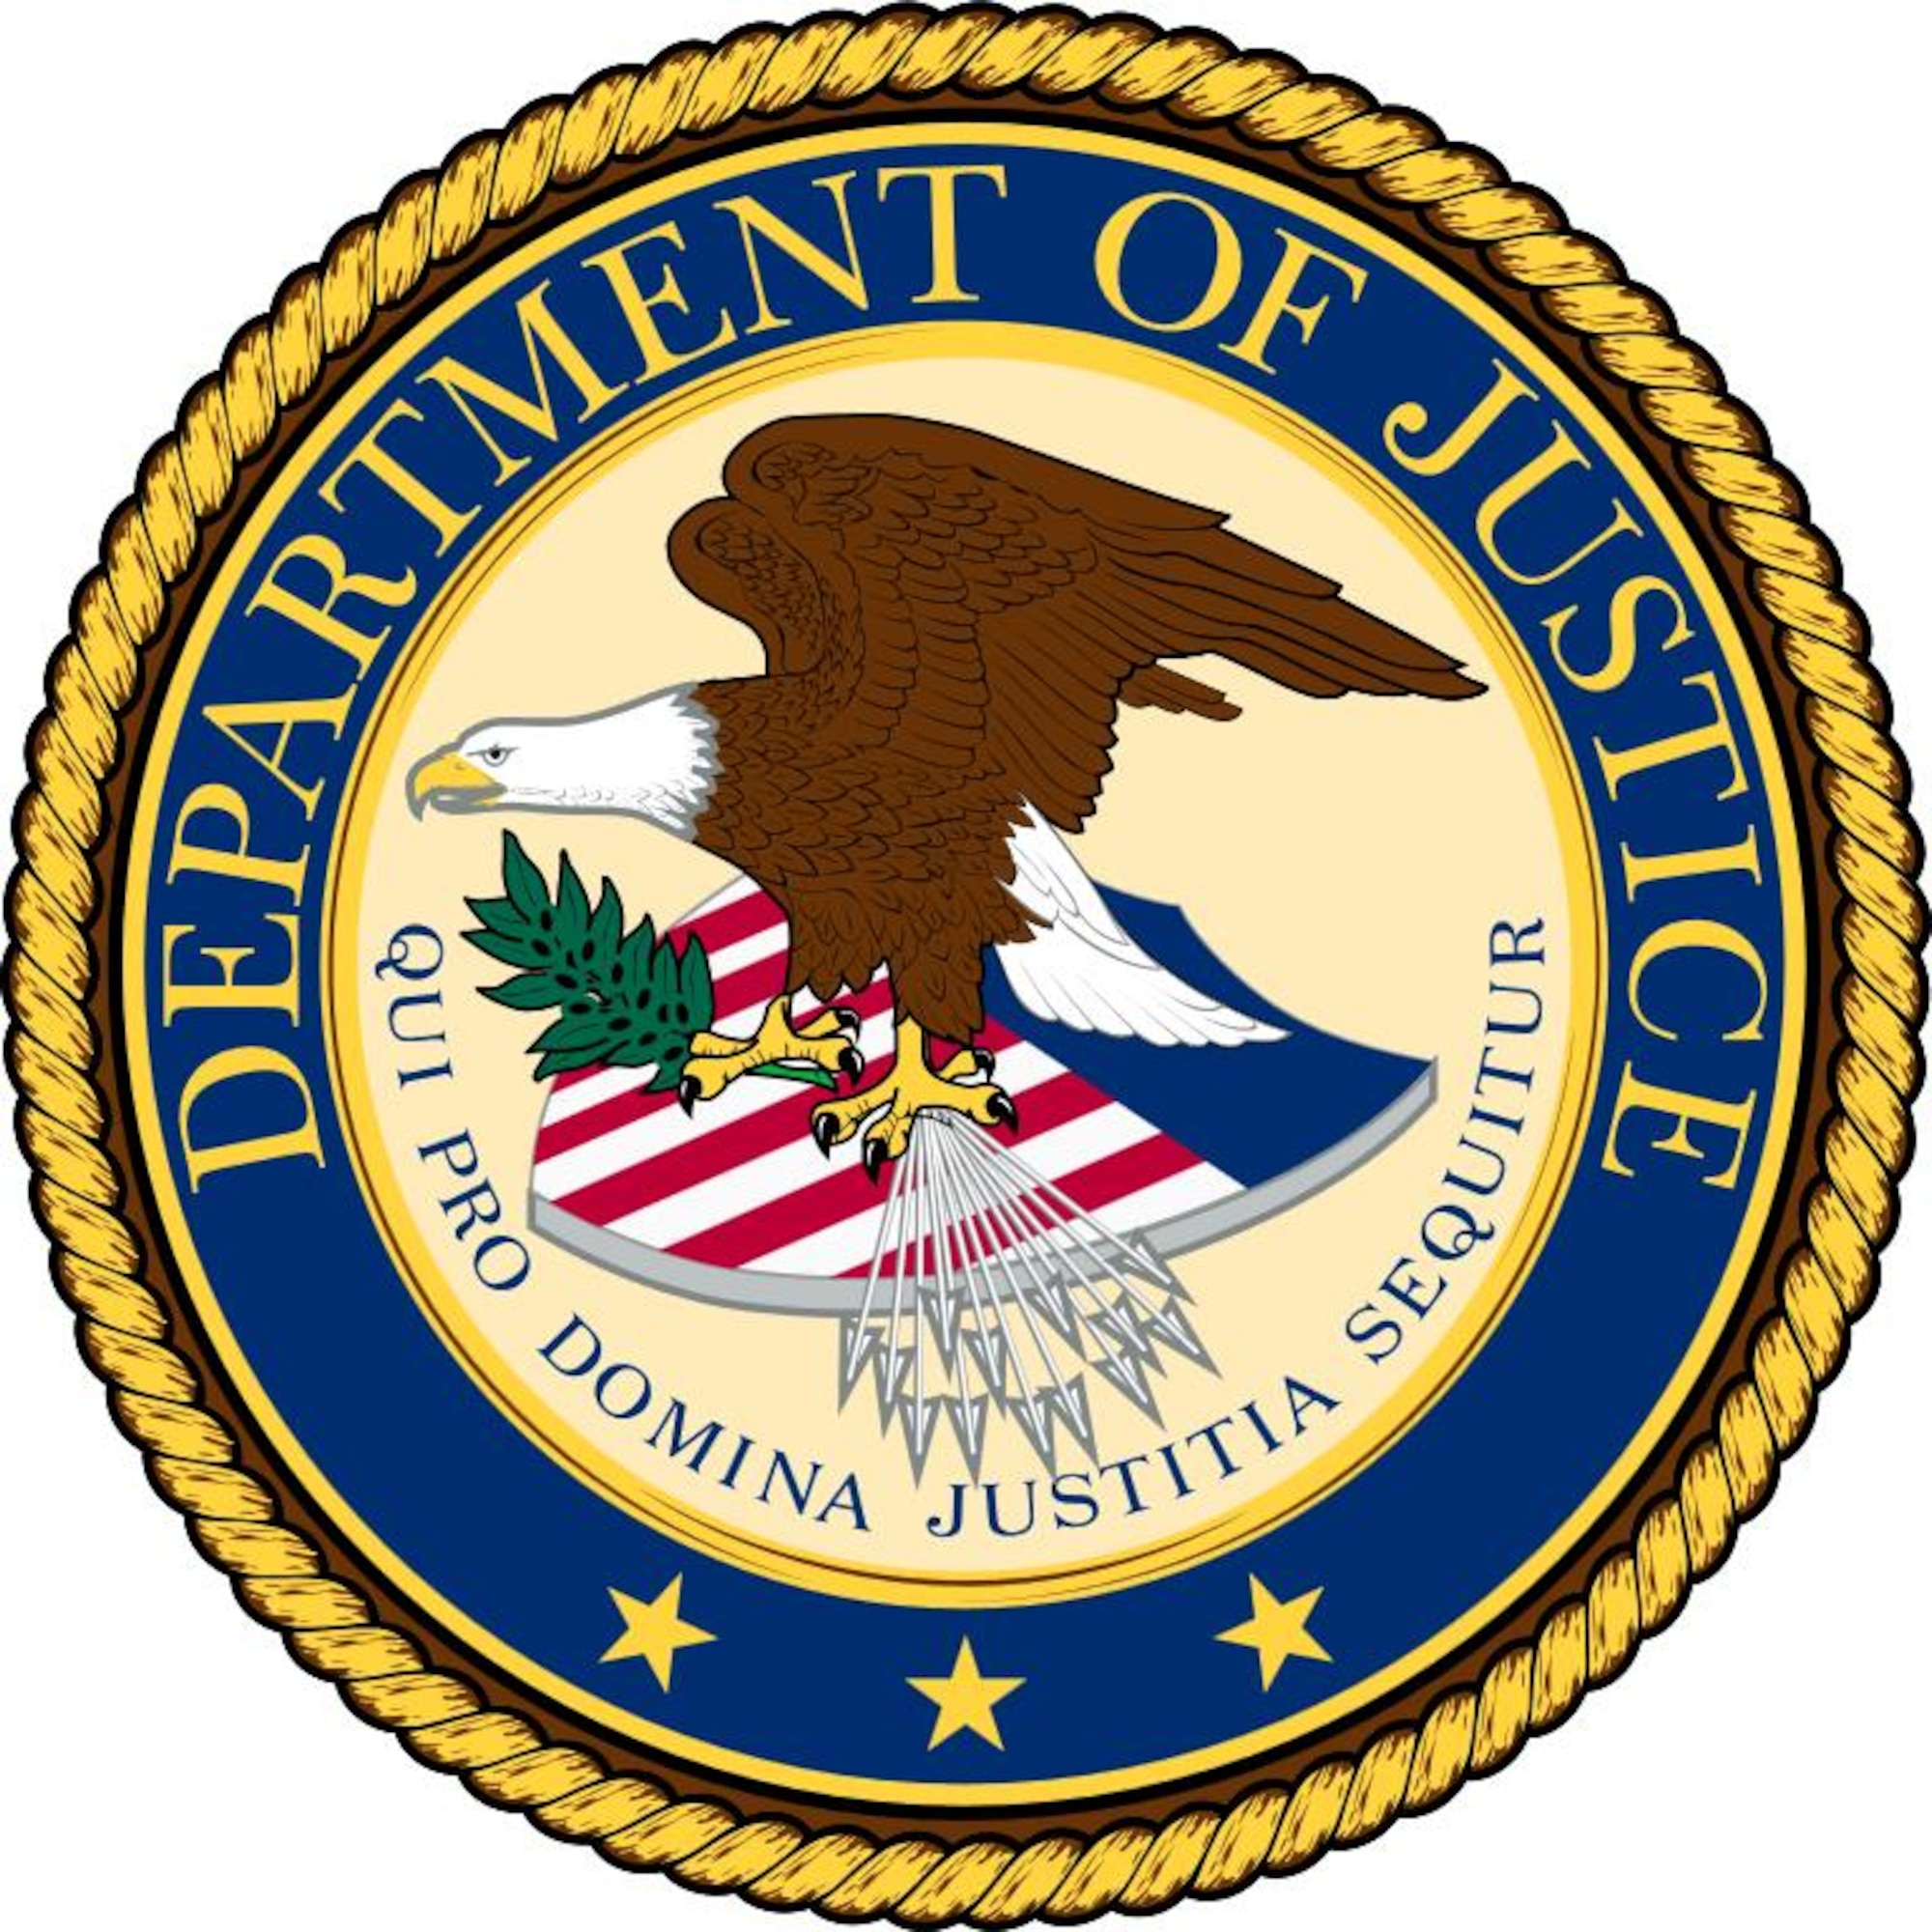 The U.S. Department of Justice selected three Air Force Office of Special Investigations Special Agents for awards to recognize their stellar efforts supporting the DoJ mission (U.S. Dept. of Justice graphic)